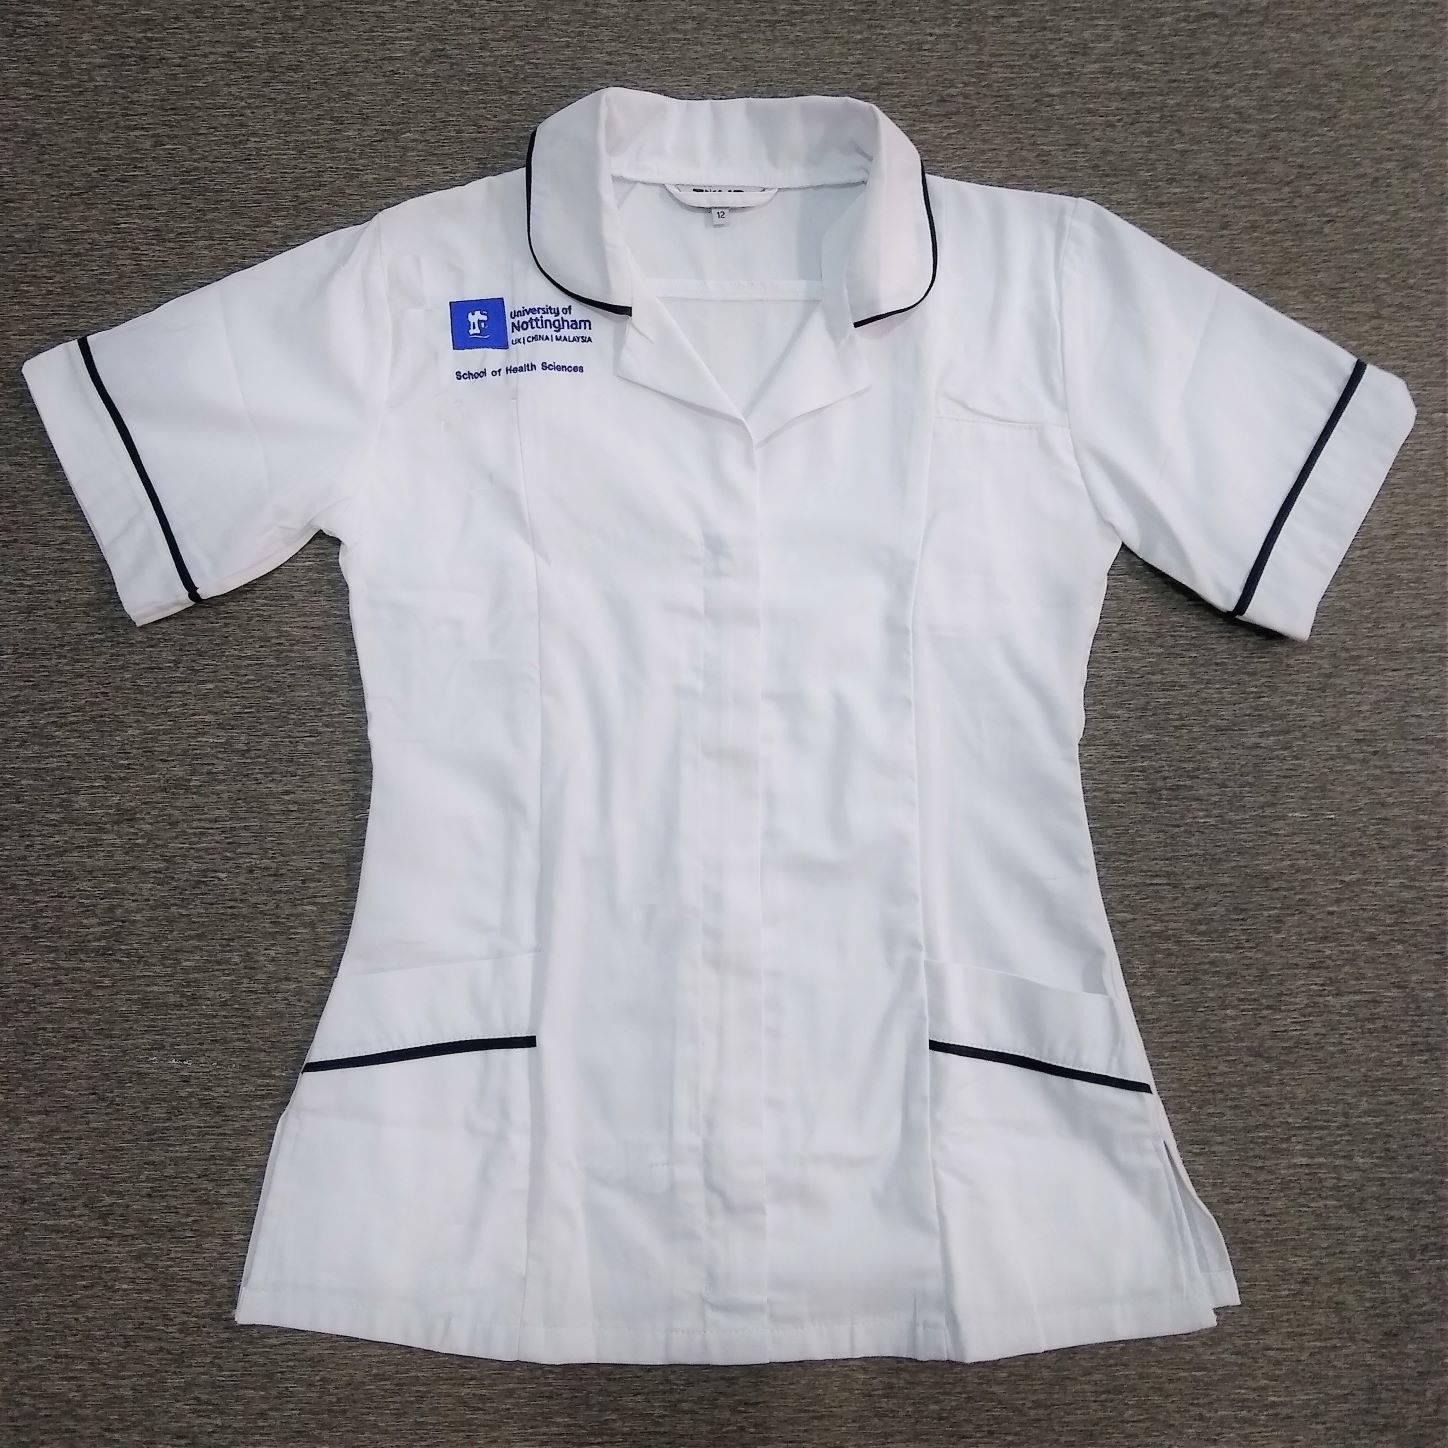 Physiotherapy Placement tunic